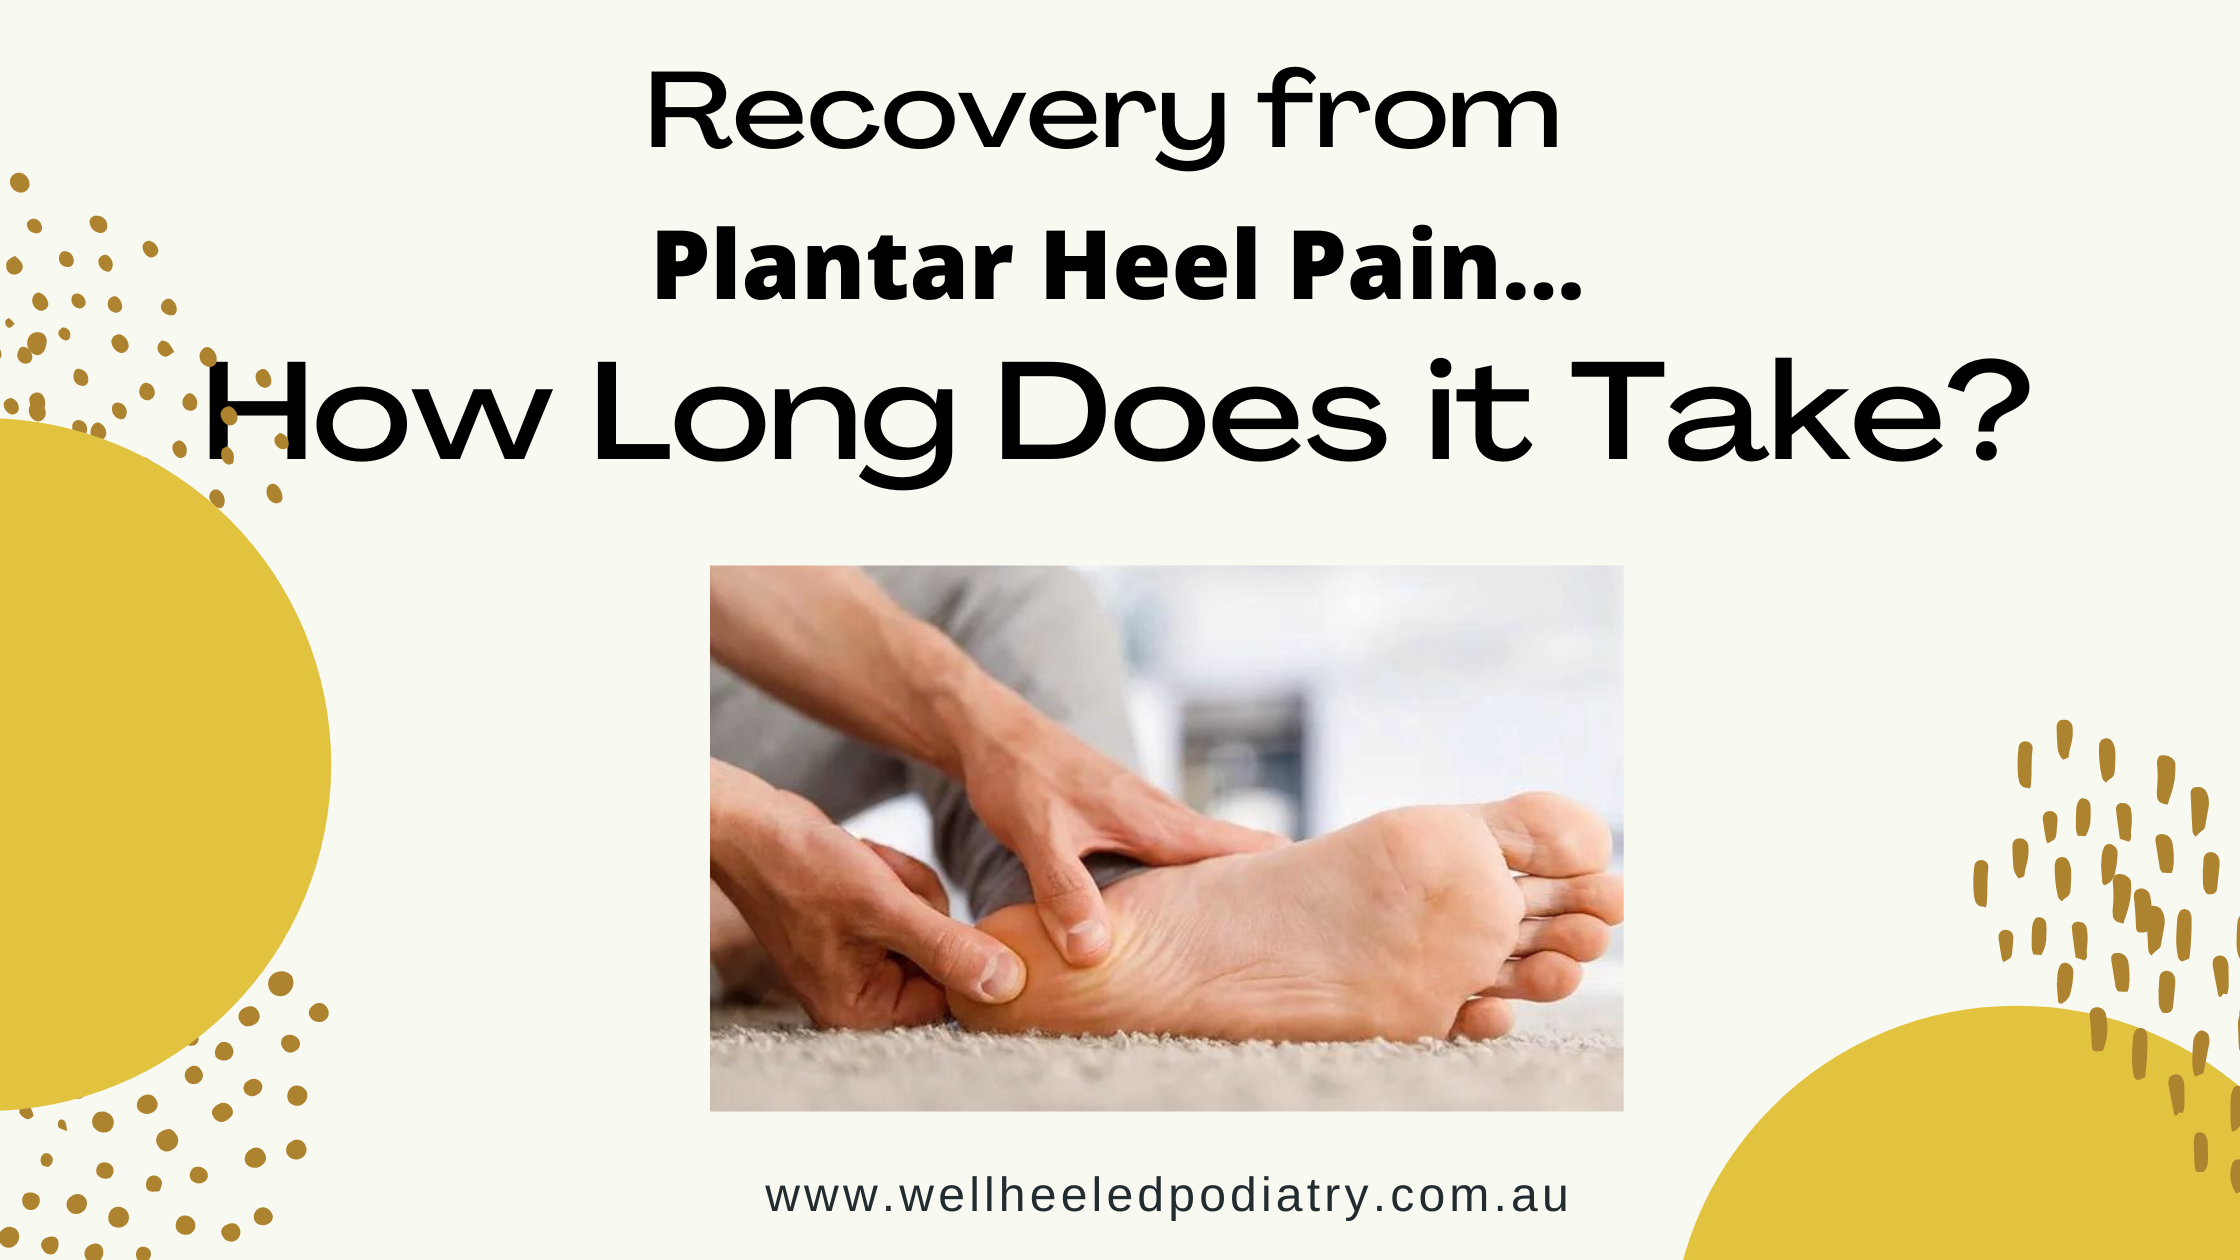 Recovery from Plantar Heel Pain How Long Does it Take? Well Heeled